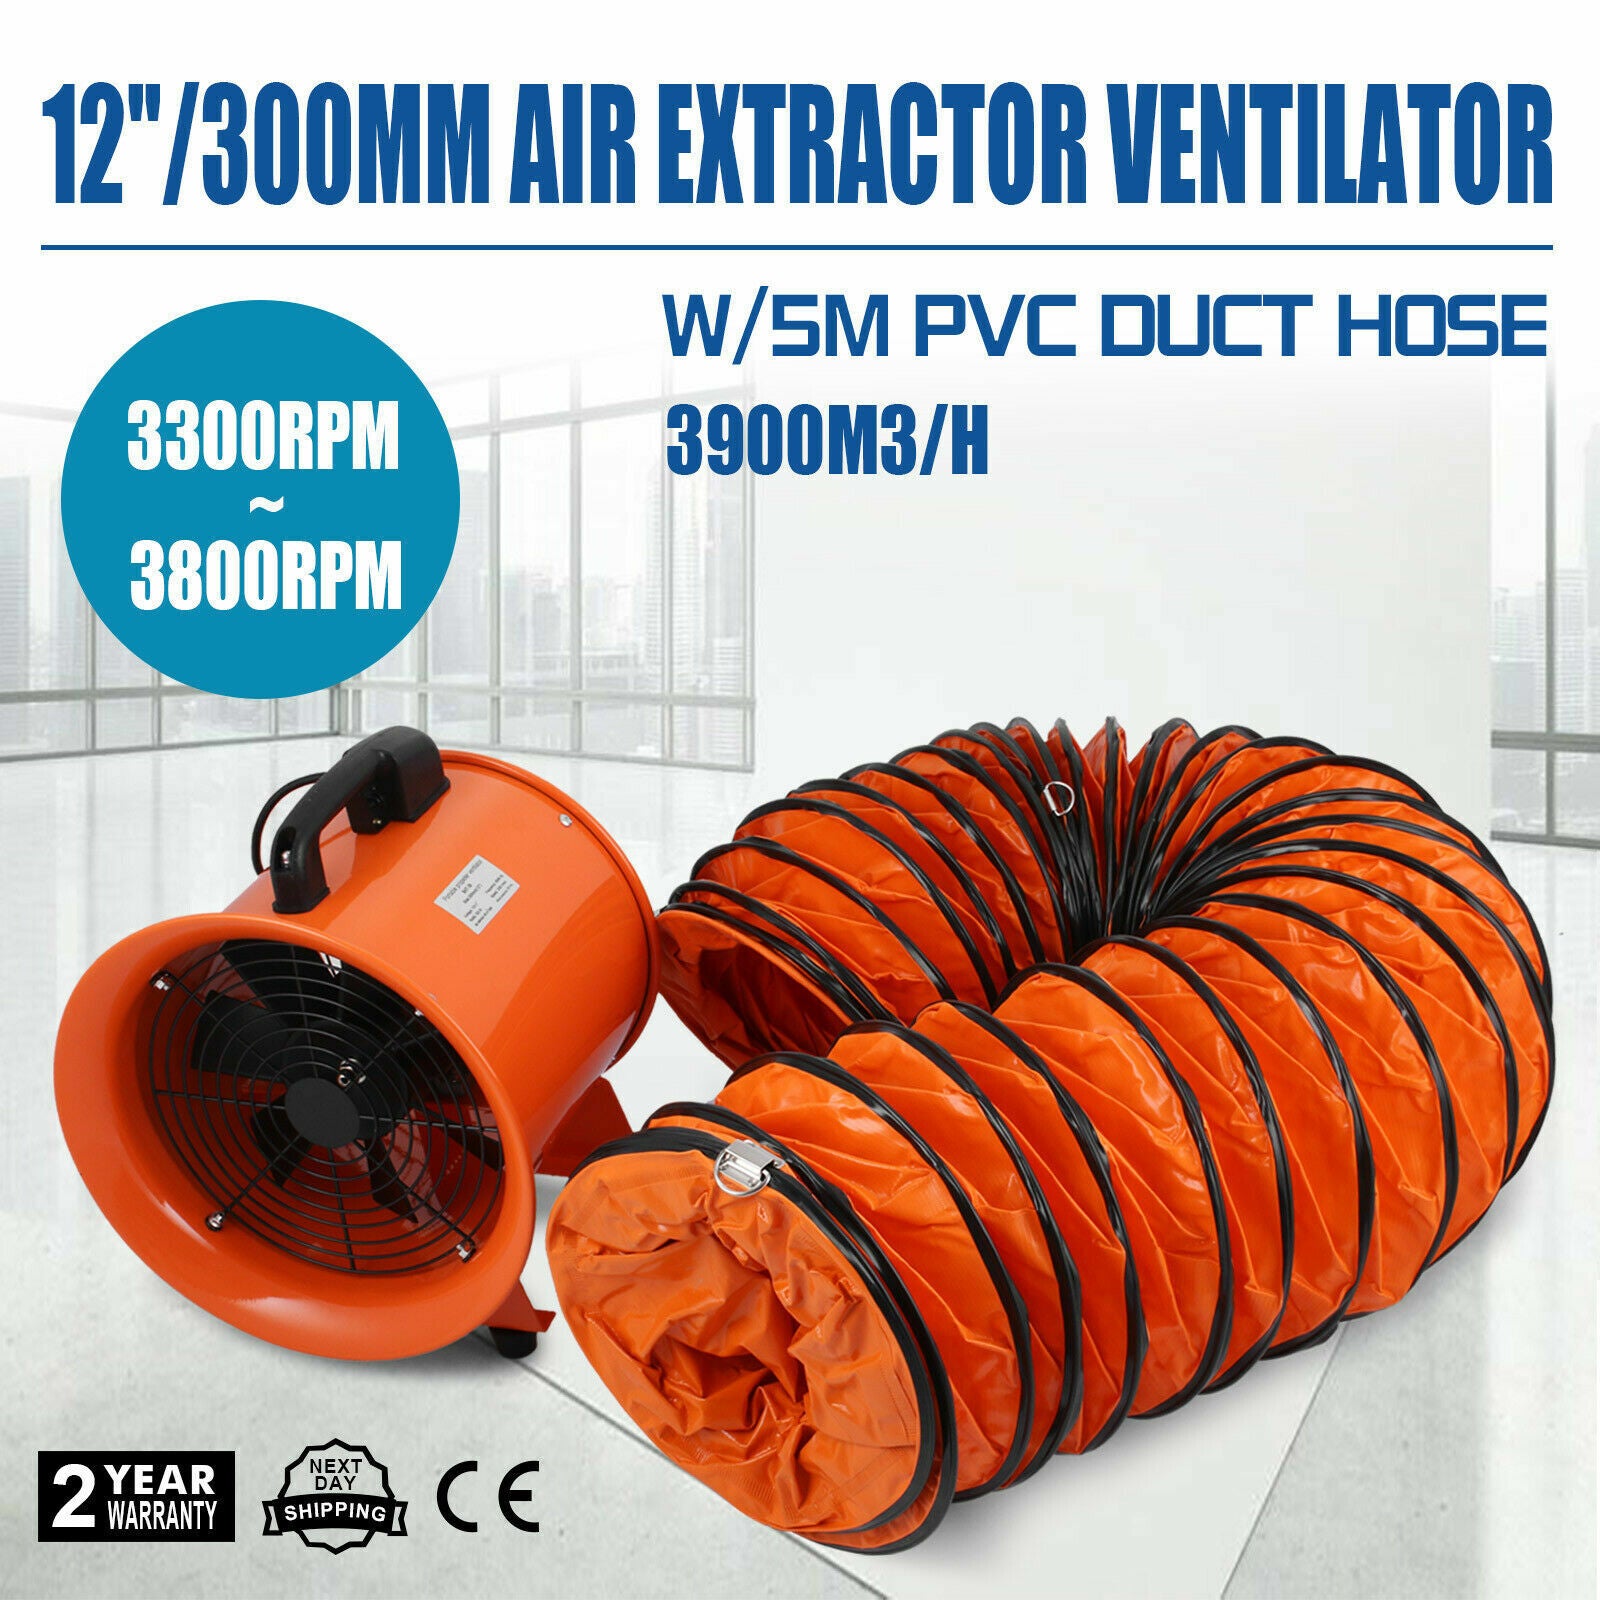 12' Extractor Blower Fan Ventilator+5M Duct Hose Electrical Exhaust Industrial